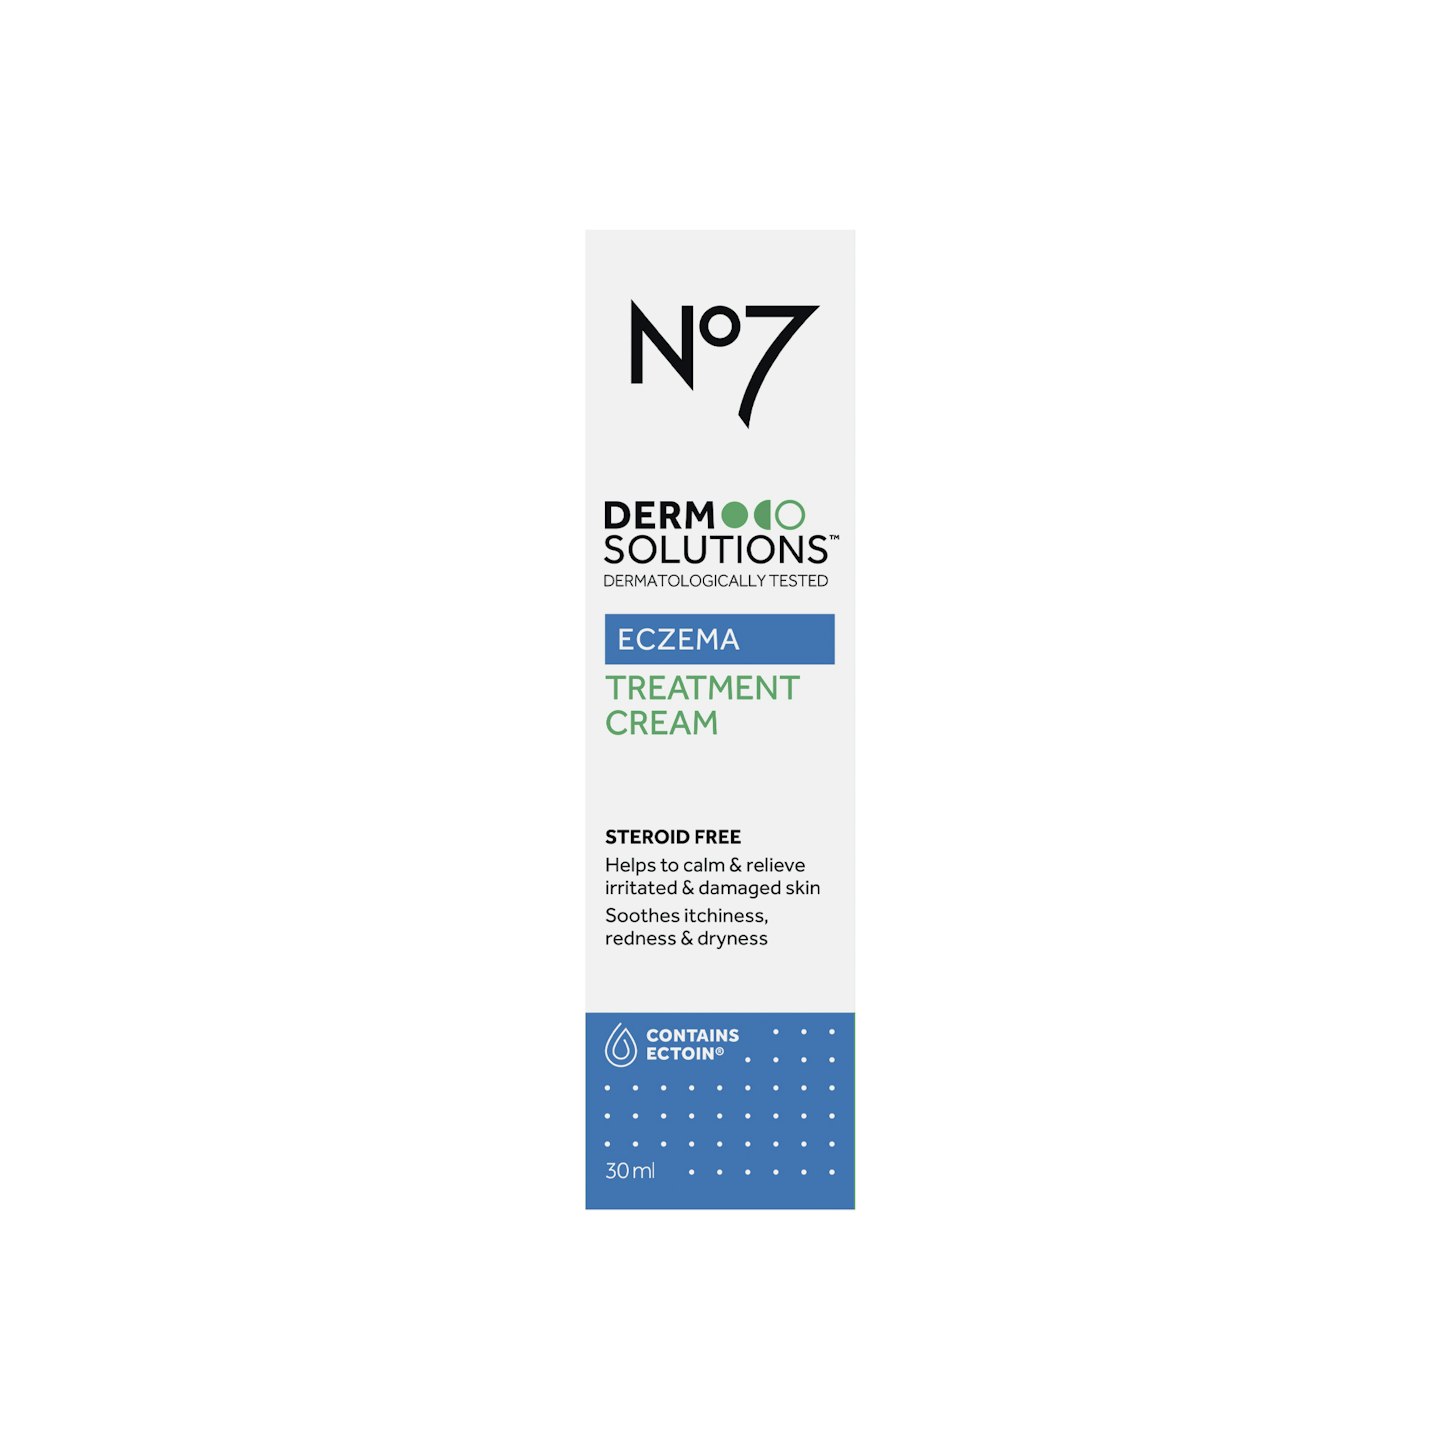 No7's New Derm Solutions Range Is Here - This Is Why We Predict A